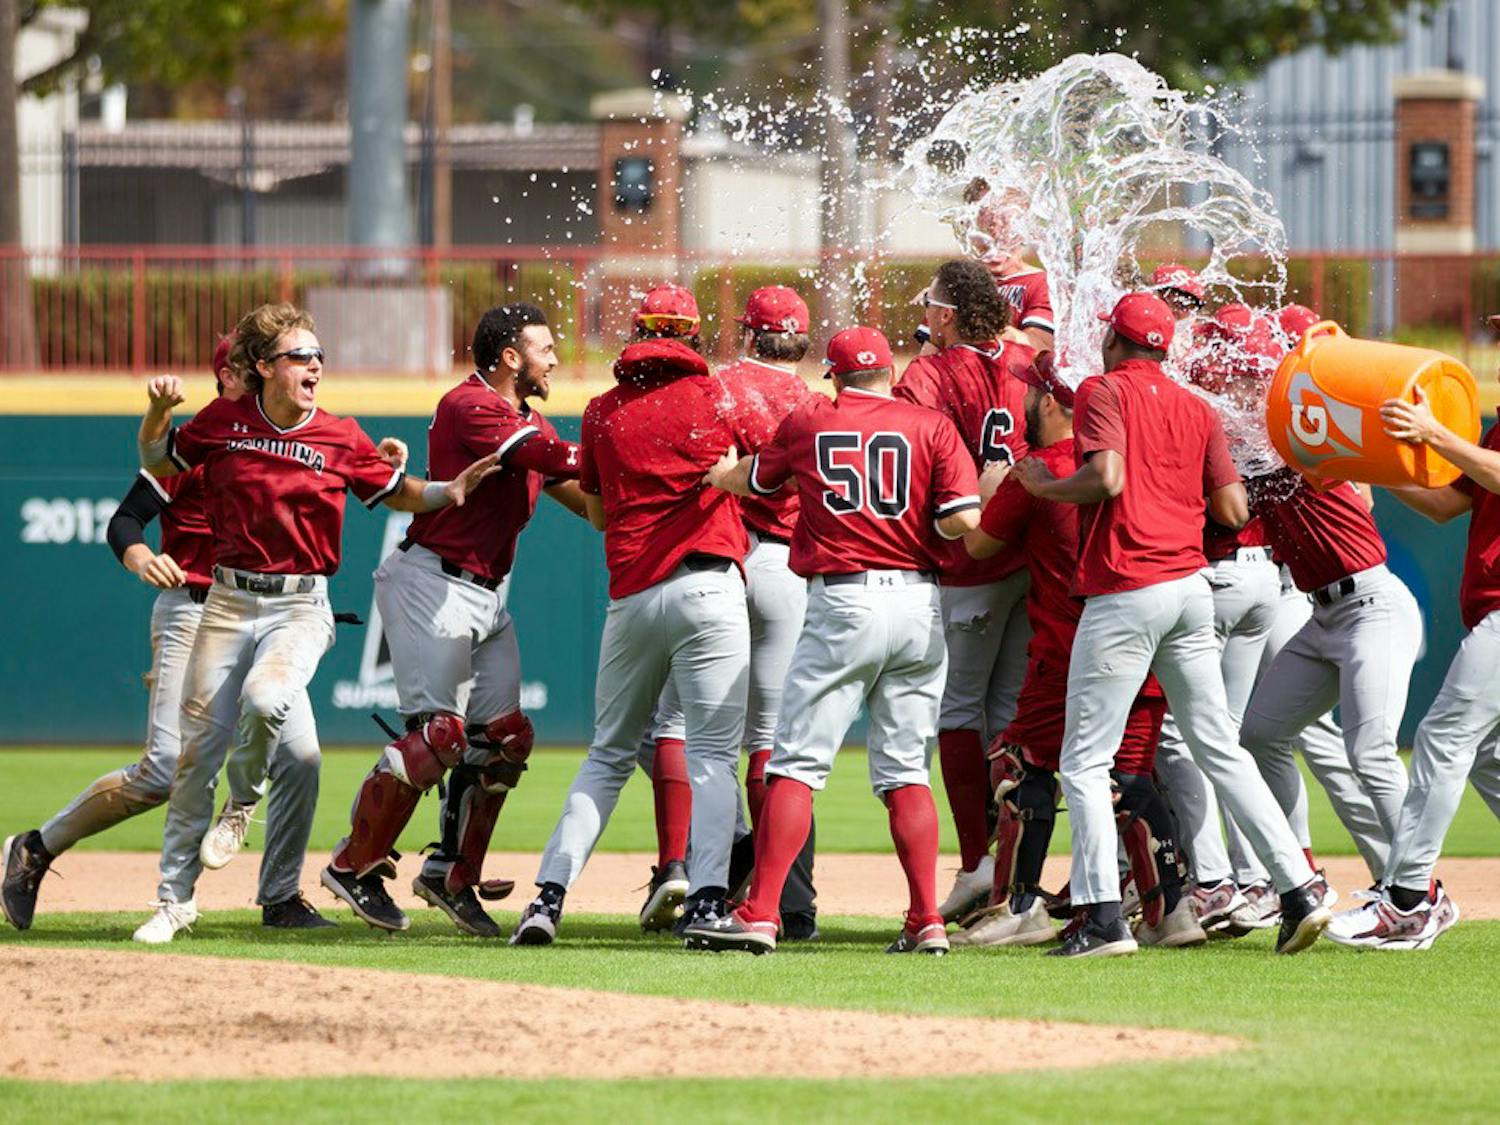 The Gamecocks' Garnet team members drench each other in Gatorade following the conclusion of their Garnet and Black scrimmage on Nov. 5, 2022. Garnet won the game 5-1, earning the victory in this year's Garnet and Black World Series.